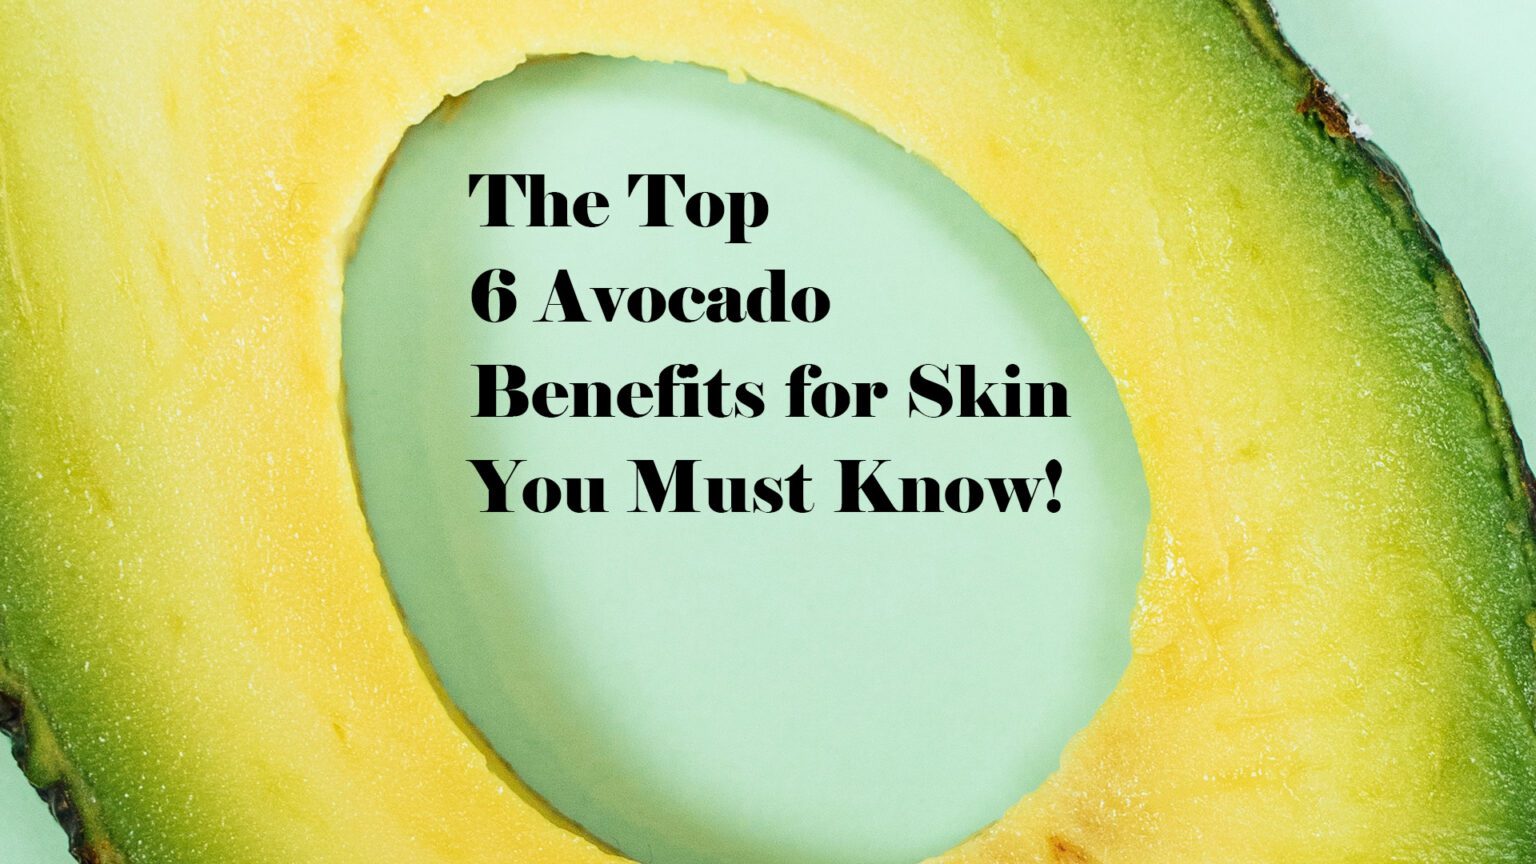 The-Top-6-Avocado-Benefits-for-Skin-You-Must-Know